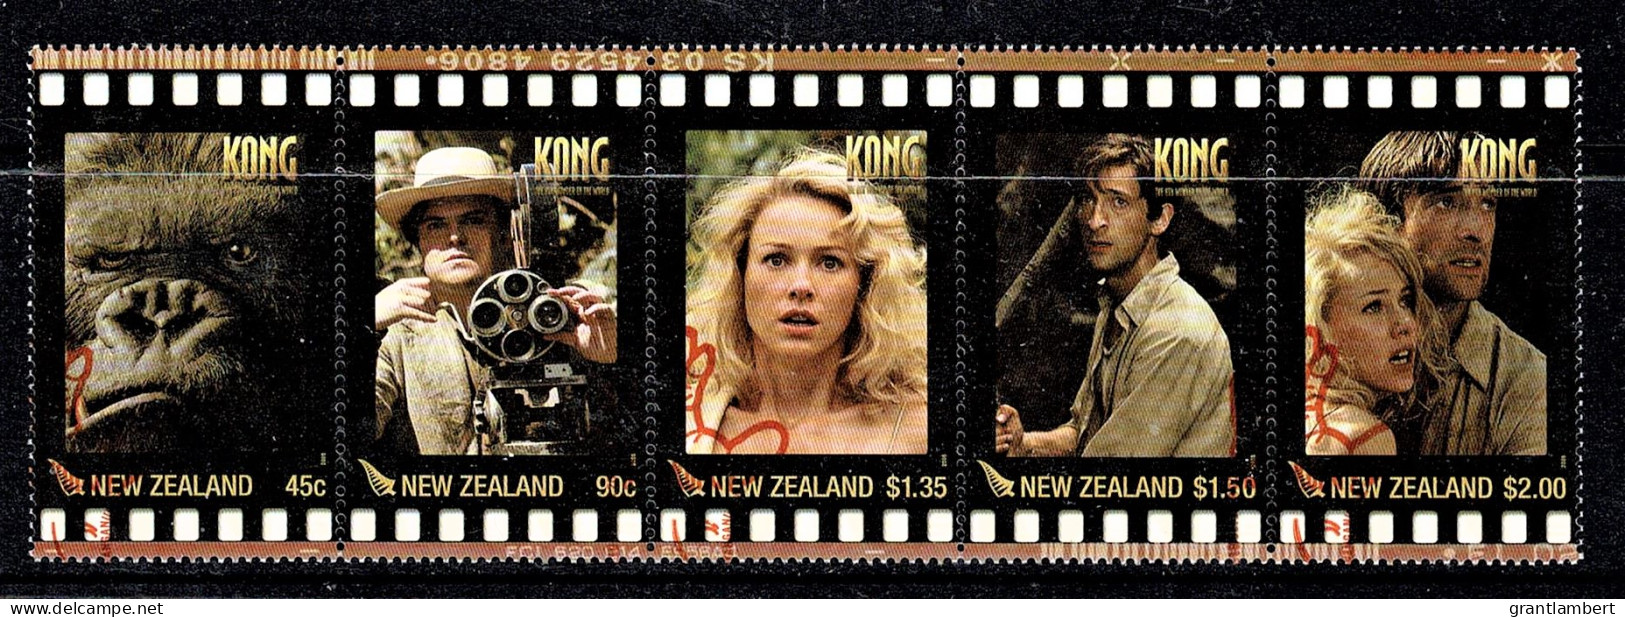 New Zealand 2005 King Kong Set As Strip Of 5 Used - Gebraucht